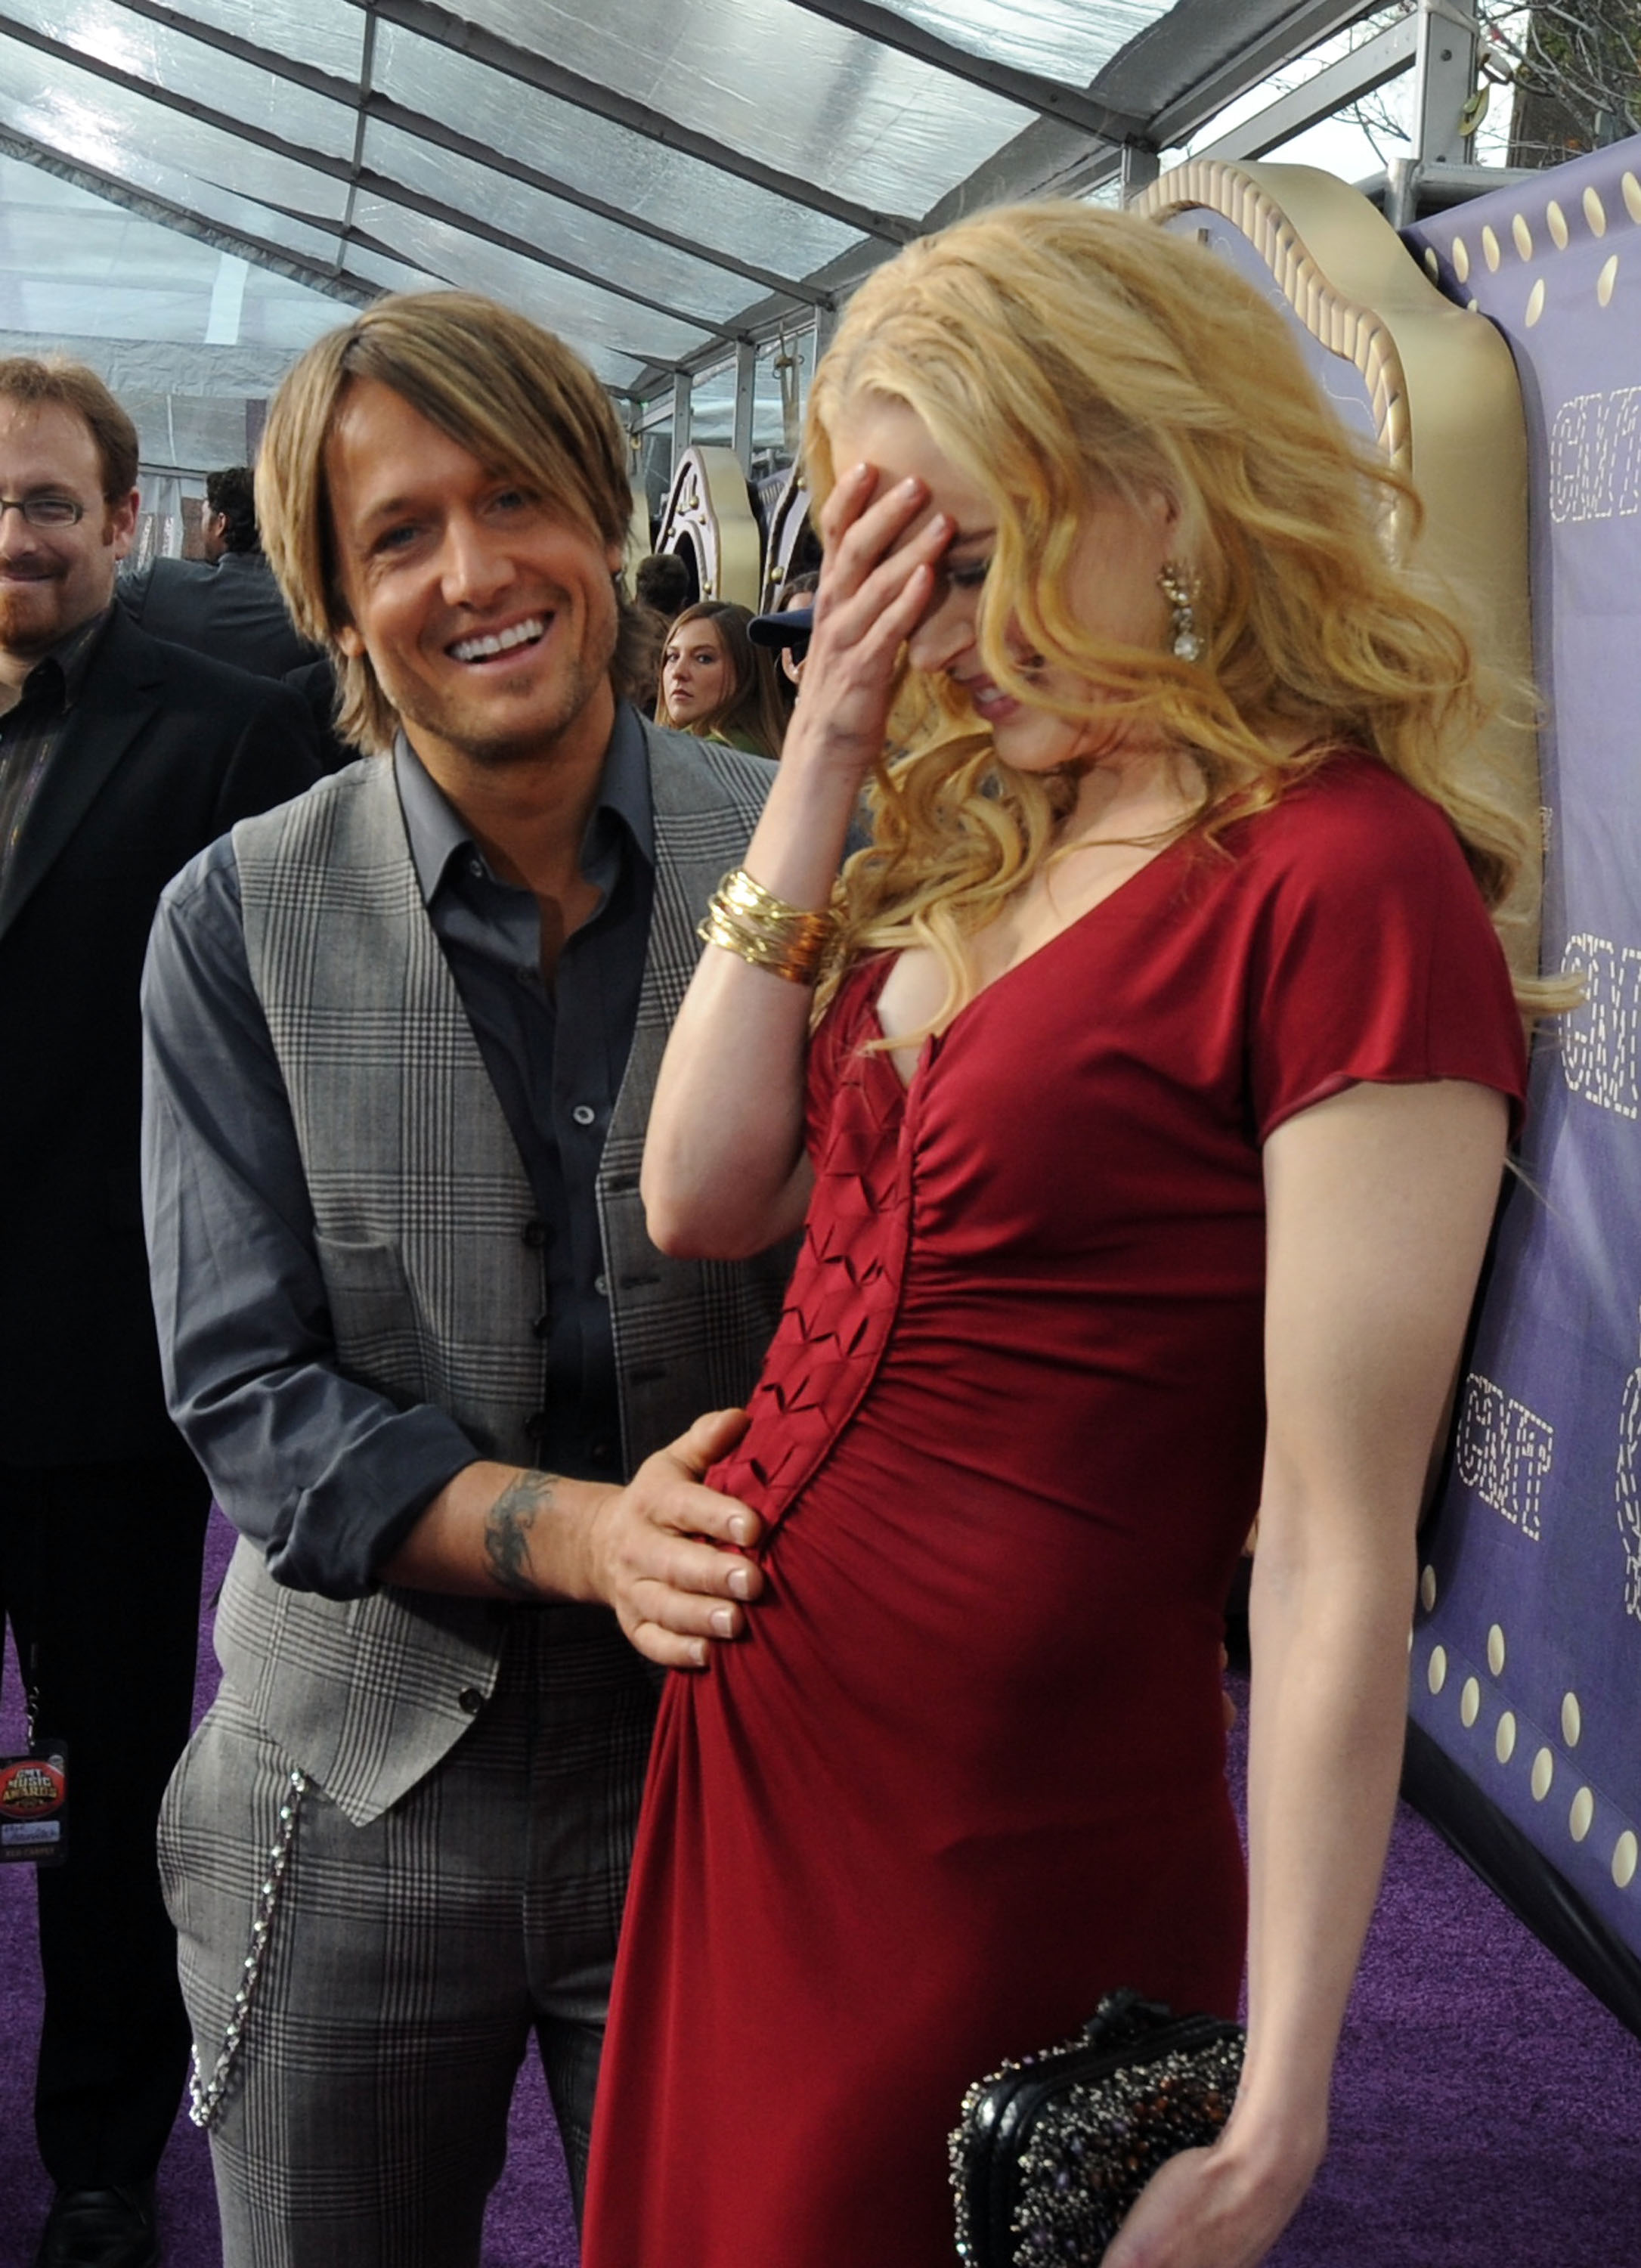 Keith Urban and Nicole Kidman at the CMT Music Awards on April 14, 2008, in Nashville, Tennessee | Source: Getty Images